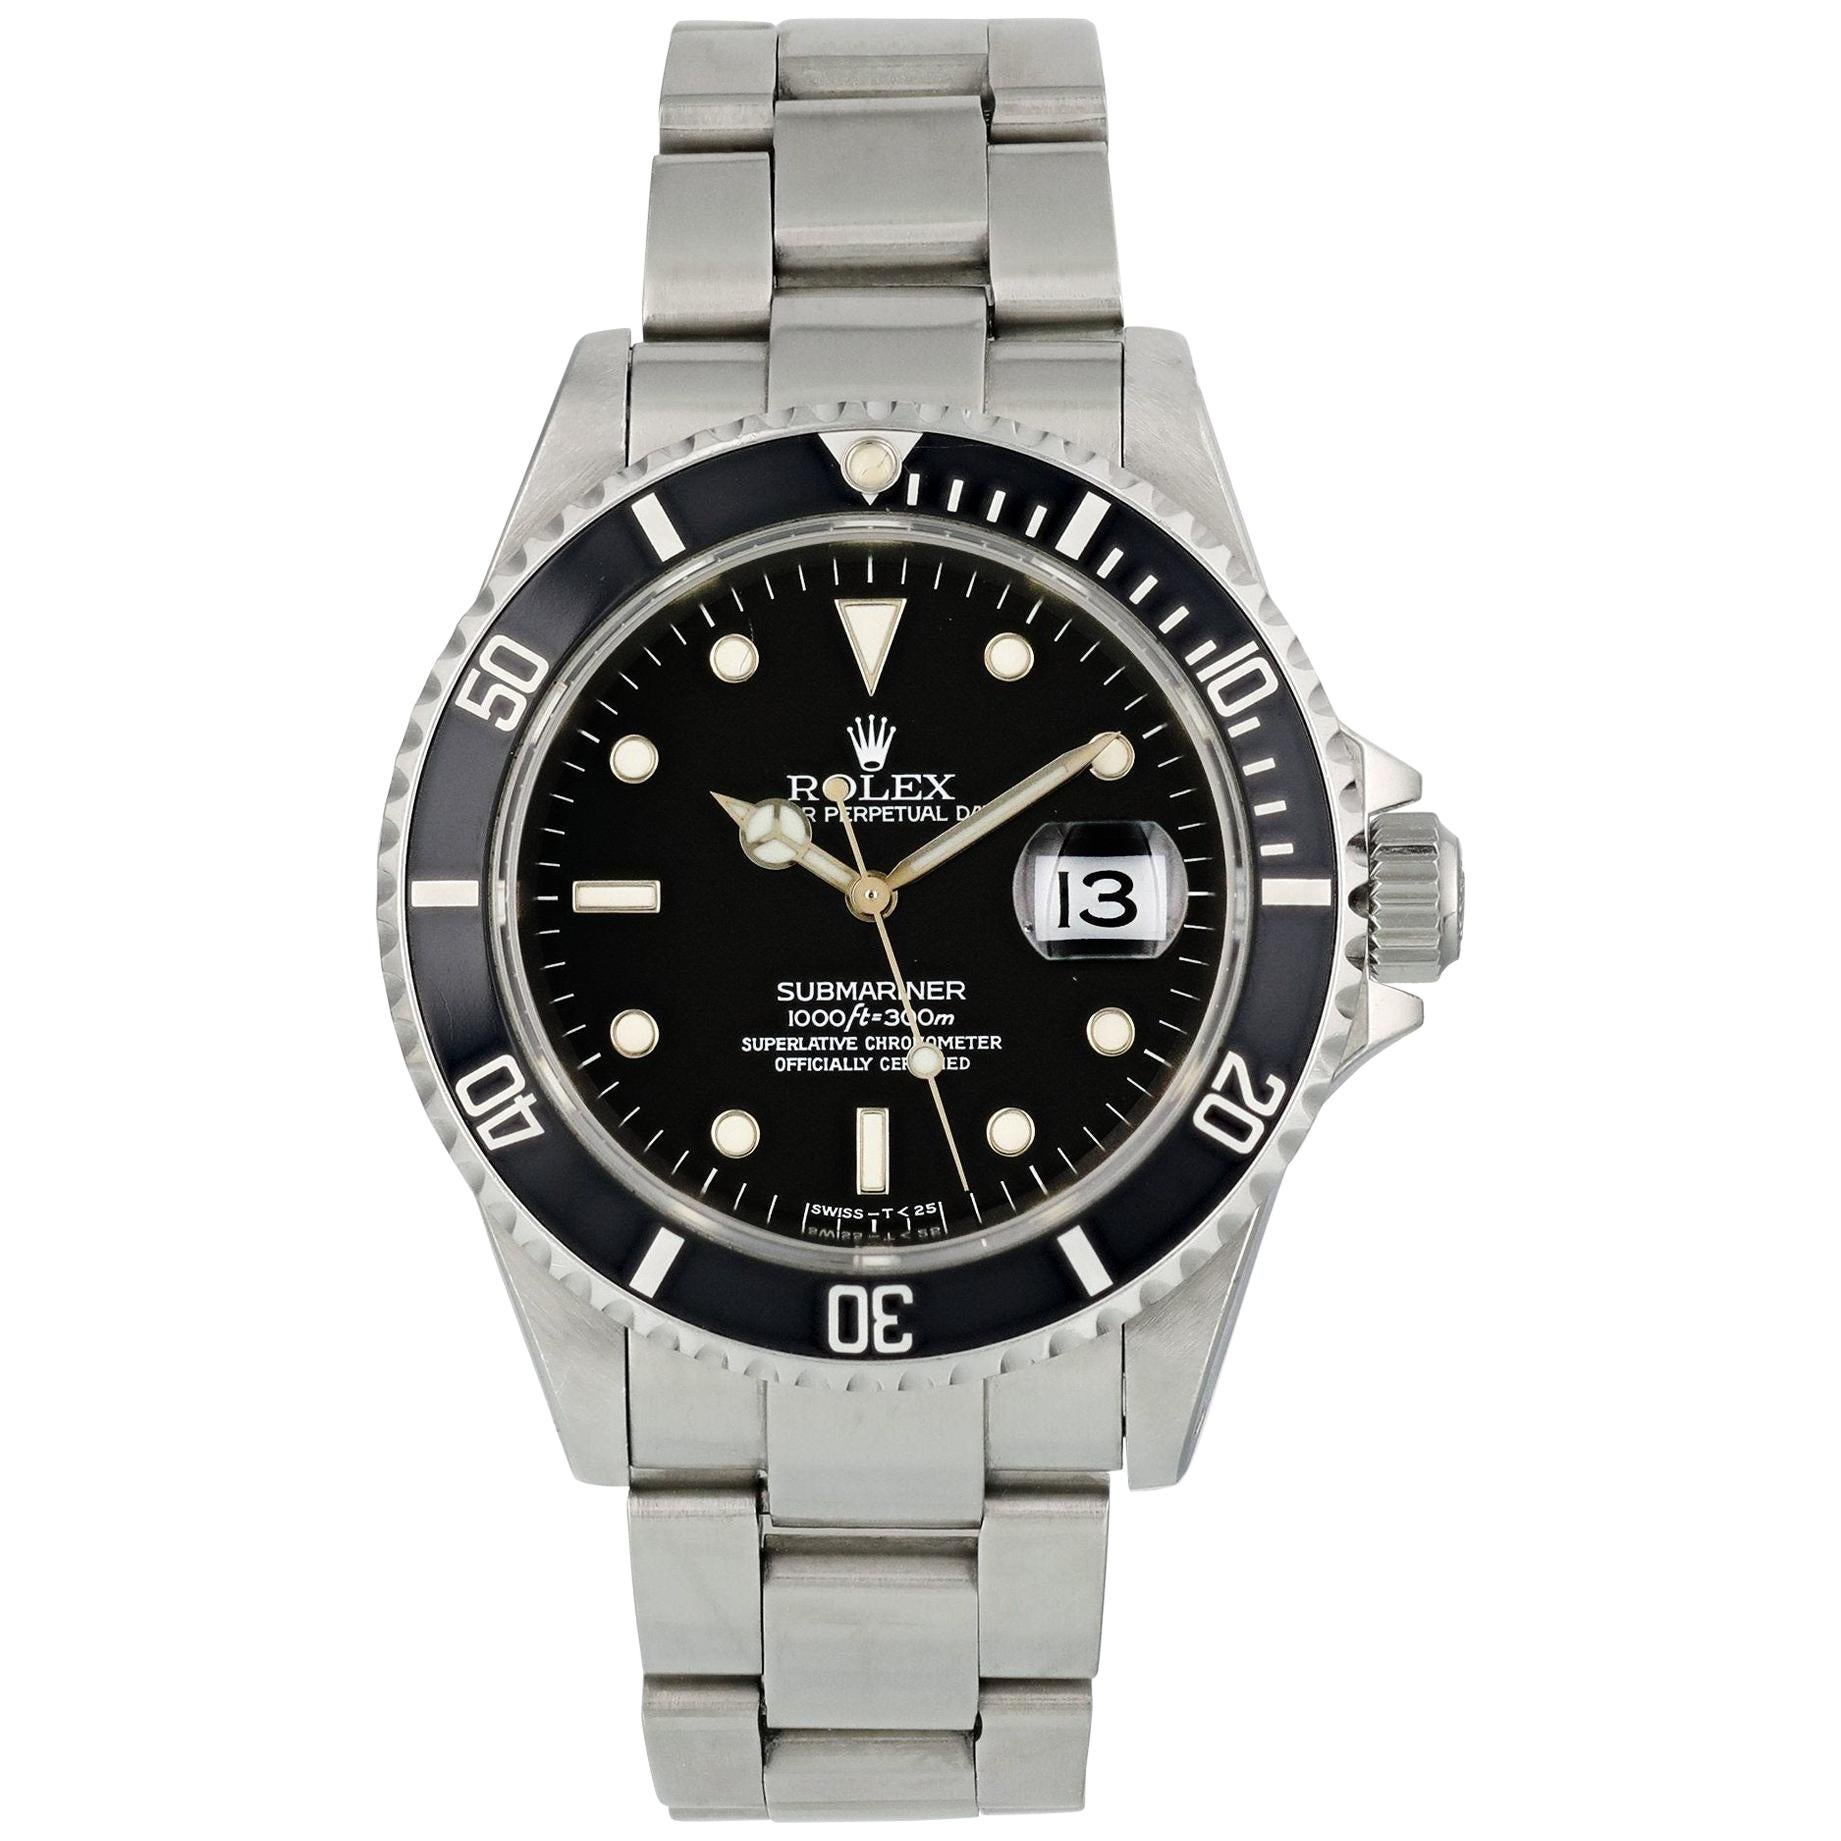 Rolex Submariner 16610 Men's Watch Box Papers For Sale